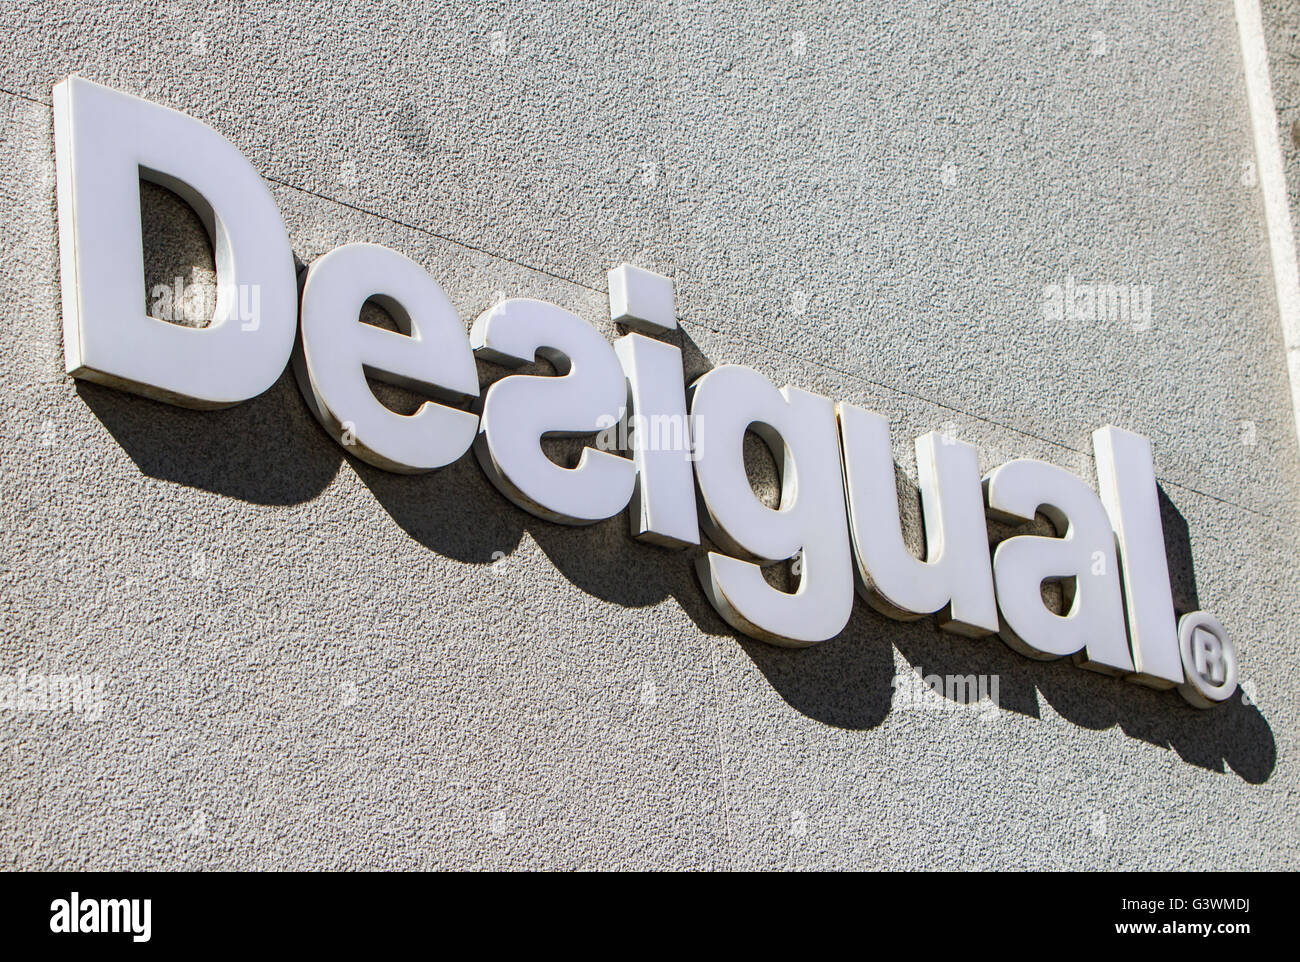 MADRID, SPAIN - MARCH 17, 2016: Desigual logo in Madrid. It is a casual clothing brand based in Barcelona, Spain. Stock Photo